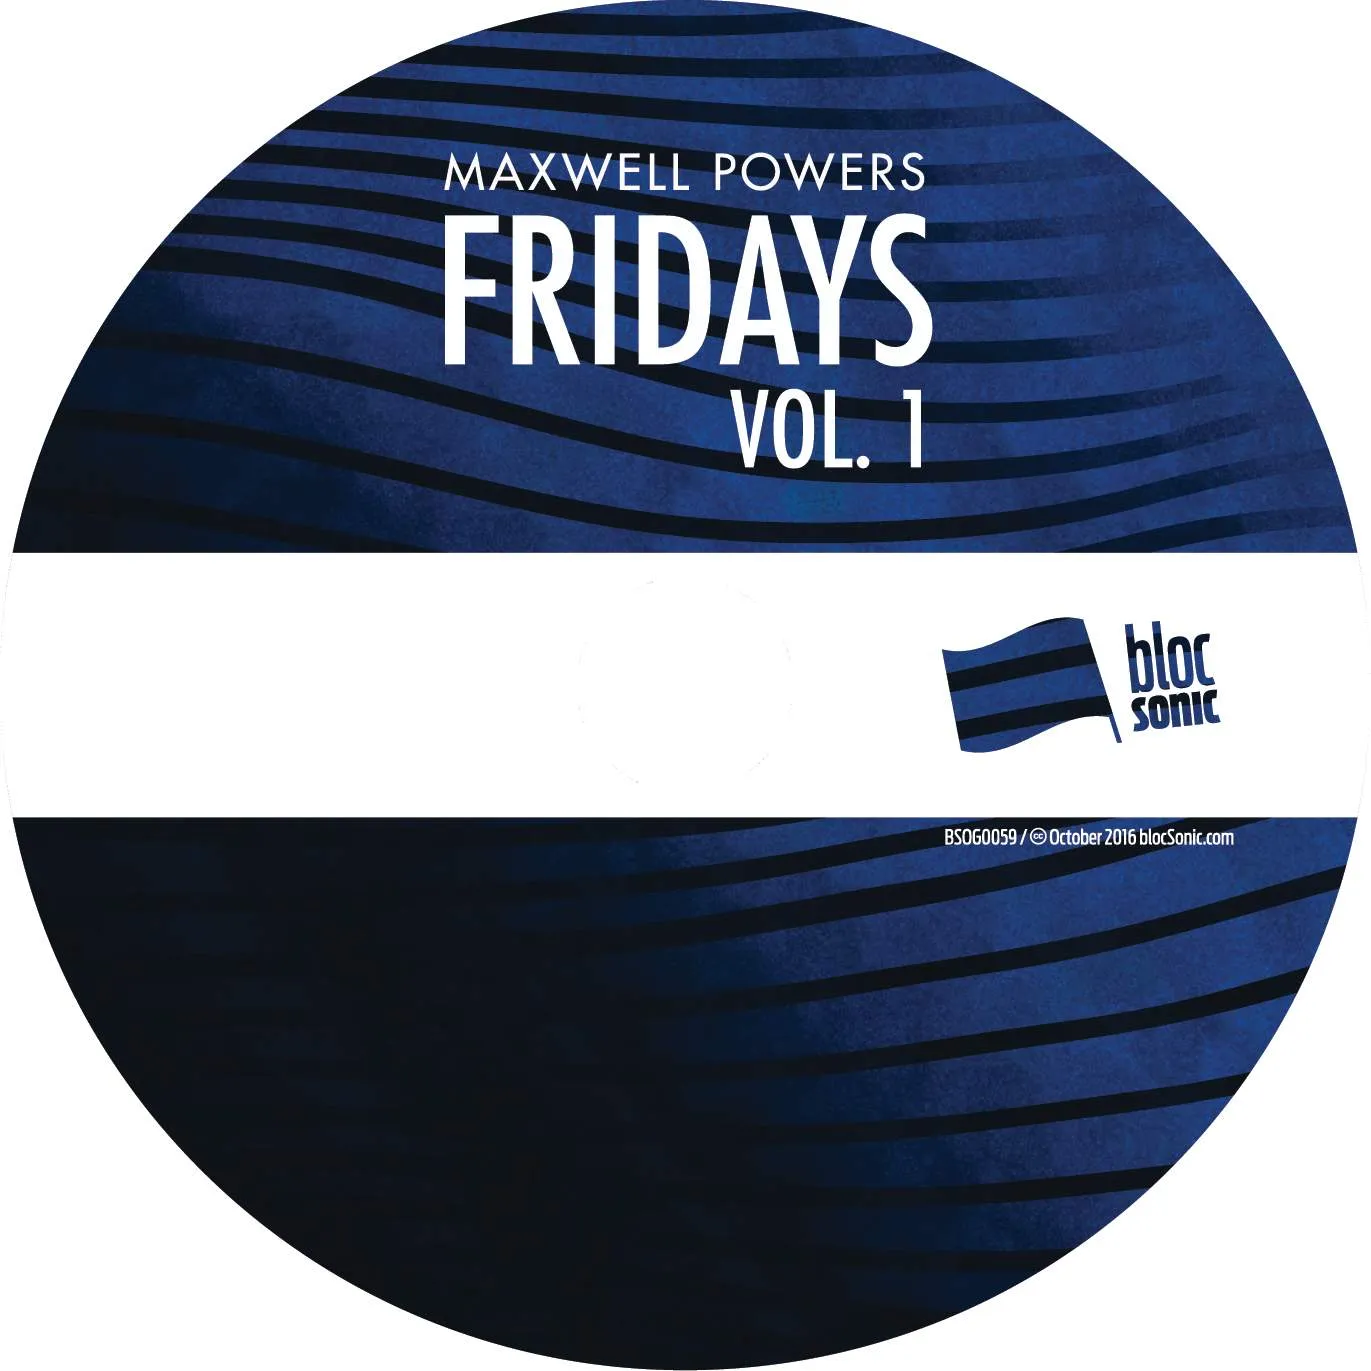 Album disc for “Fridays, Volume 1” by Maxwell Powers